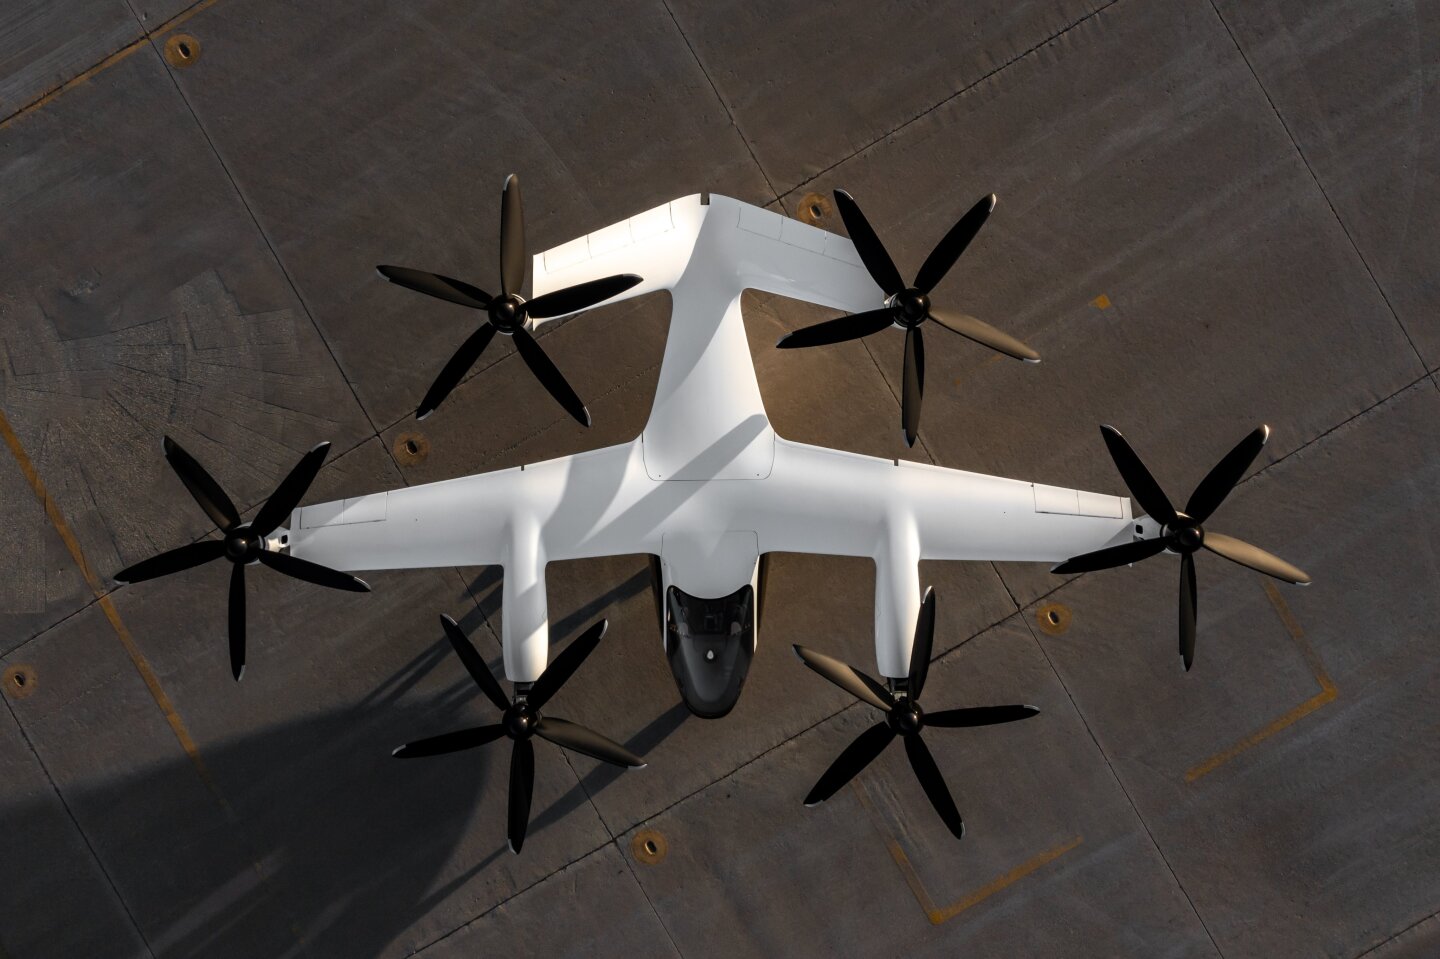 Joby Aviation's S4 eVTOL is one of the most advanced on the market